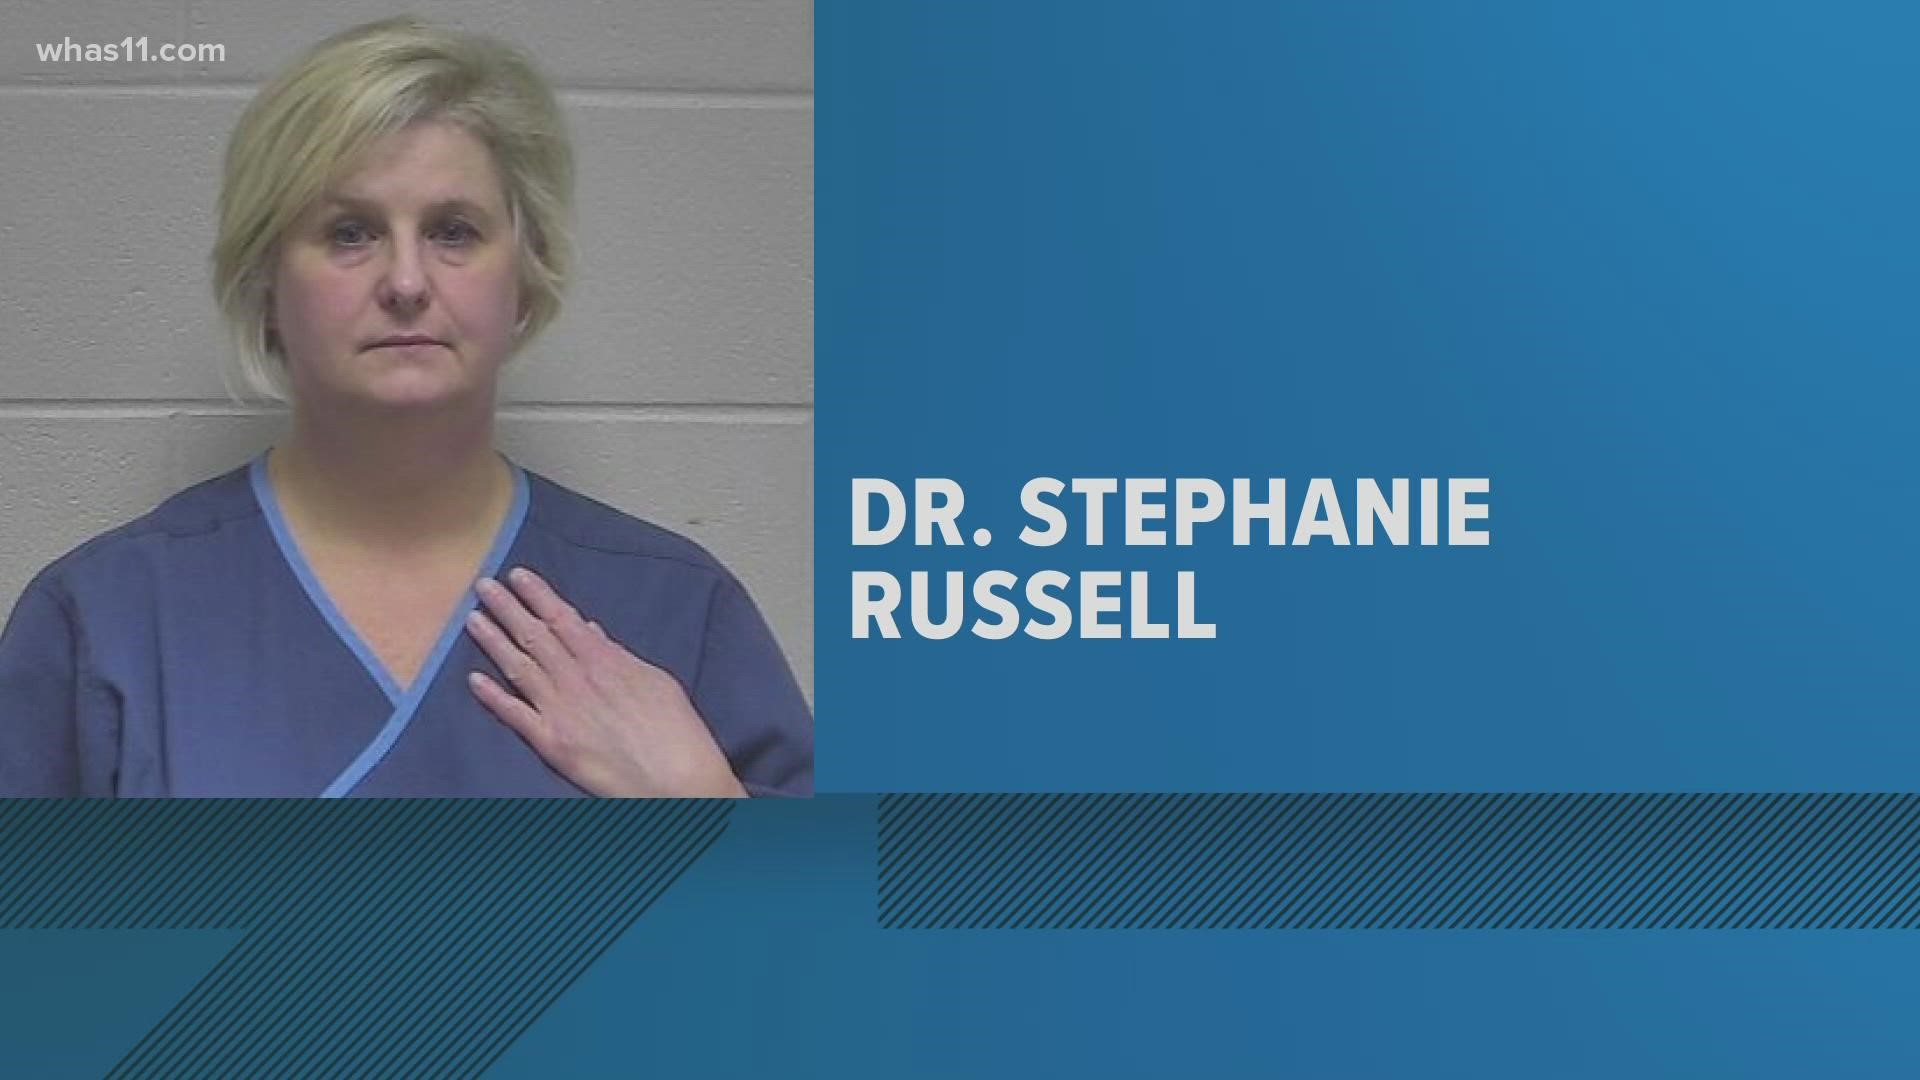 Dr. Stephanie Russell remains in custody after she plotted to kill her ex-husband.